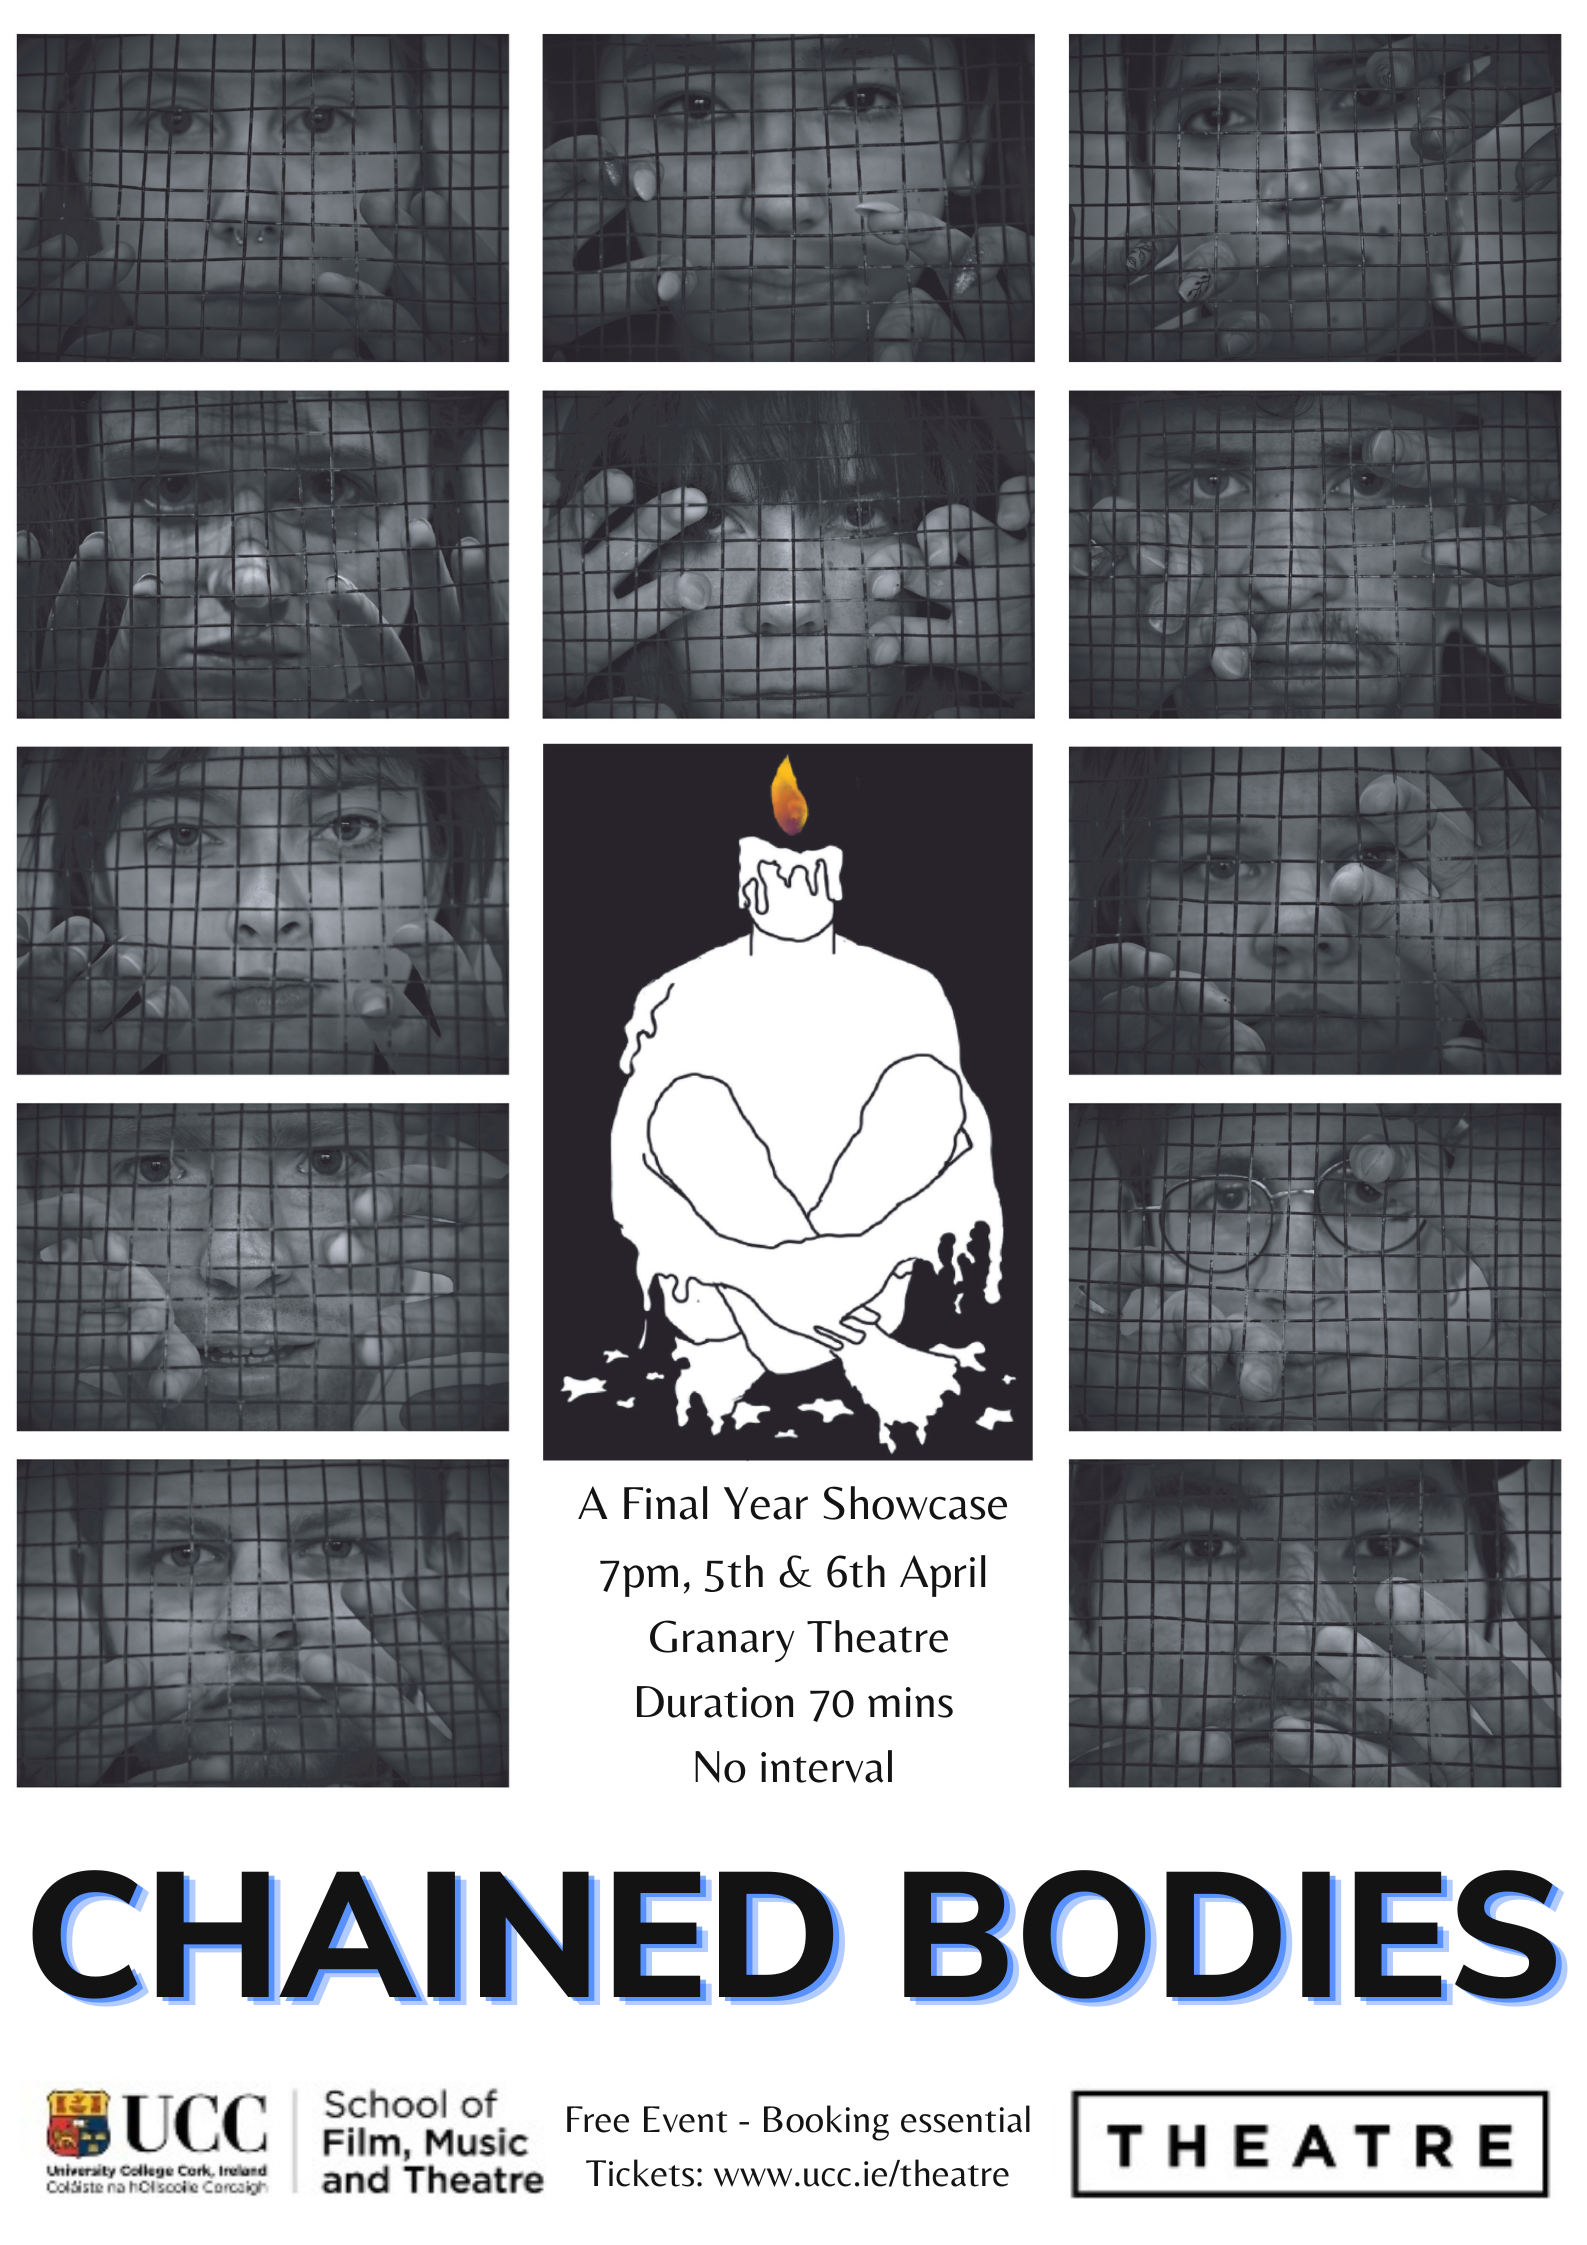 Chained Bodies - A Final Year Showcase